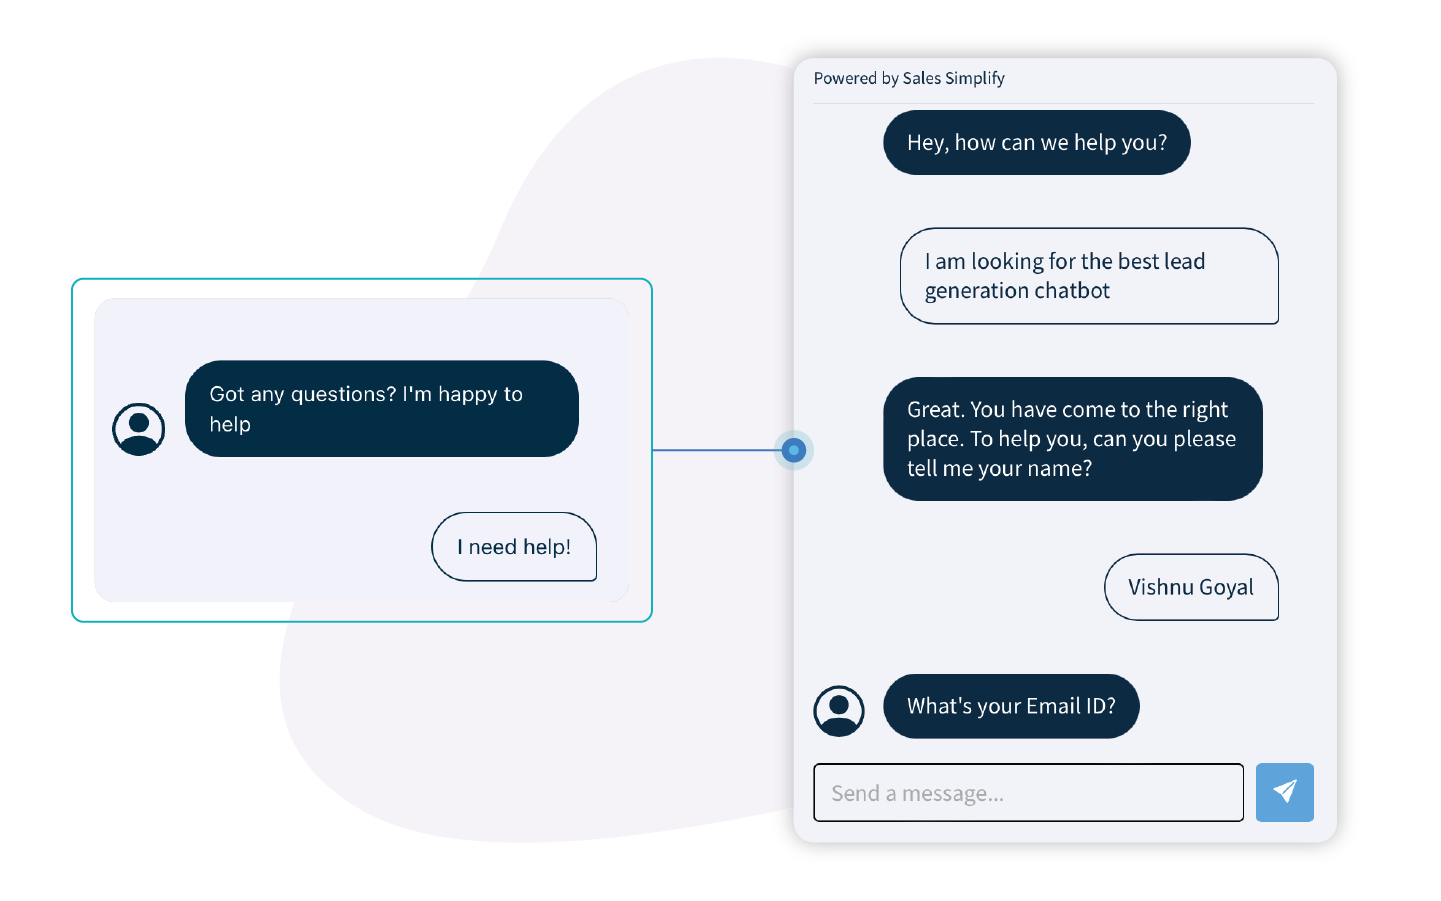 Make lead generation fun with chatbot   lead generation chatbot by sales simplify